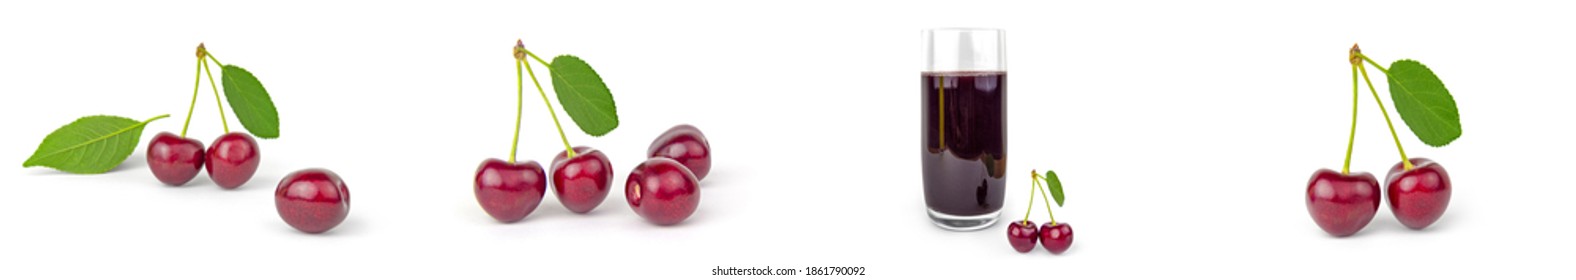 Collage of Fresh cherry isolated on a white background